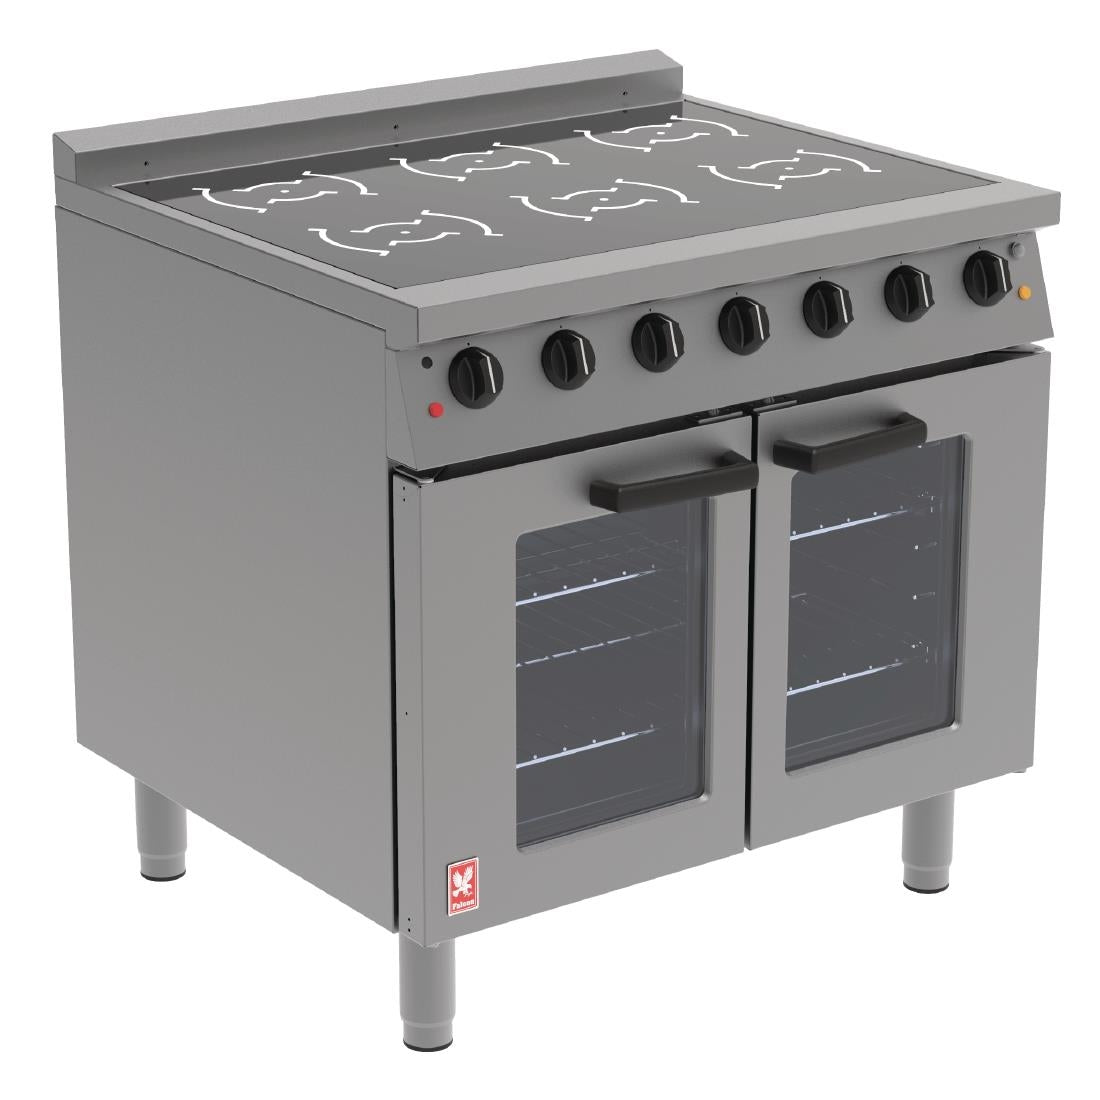 FS045 Falcon Dominator One Series 6 Zone Induction Range E163i JD Catering Equipment Solutions Ltd